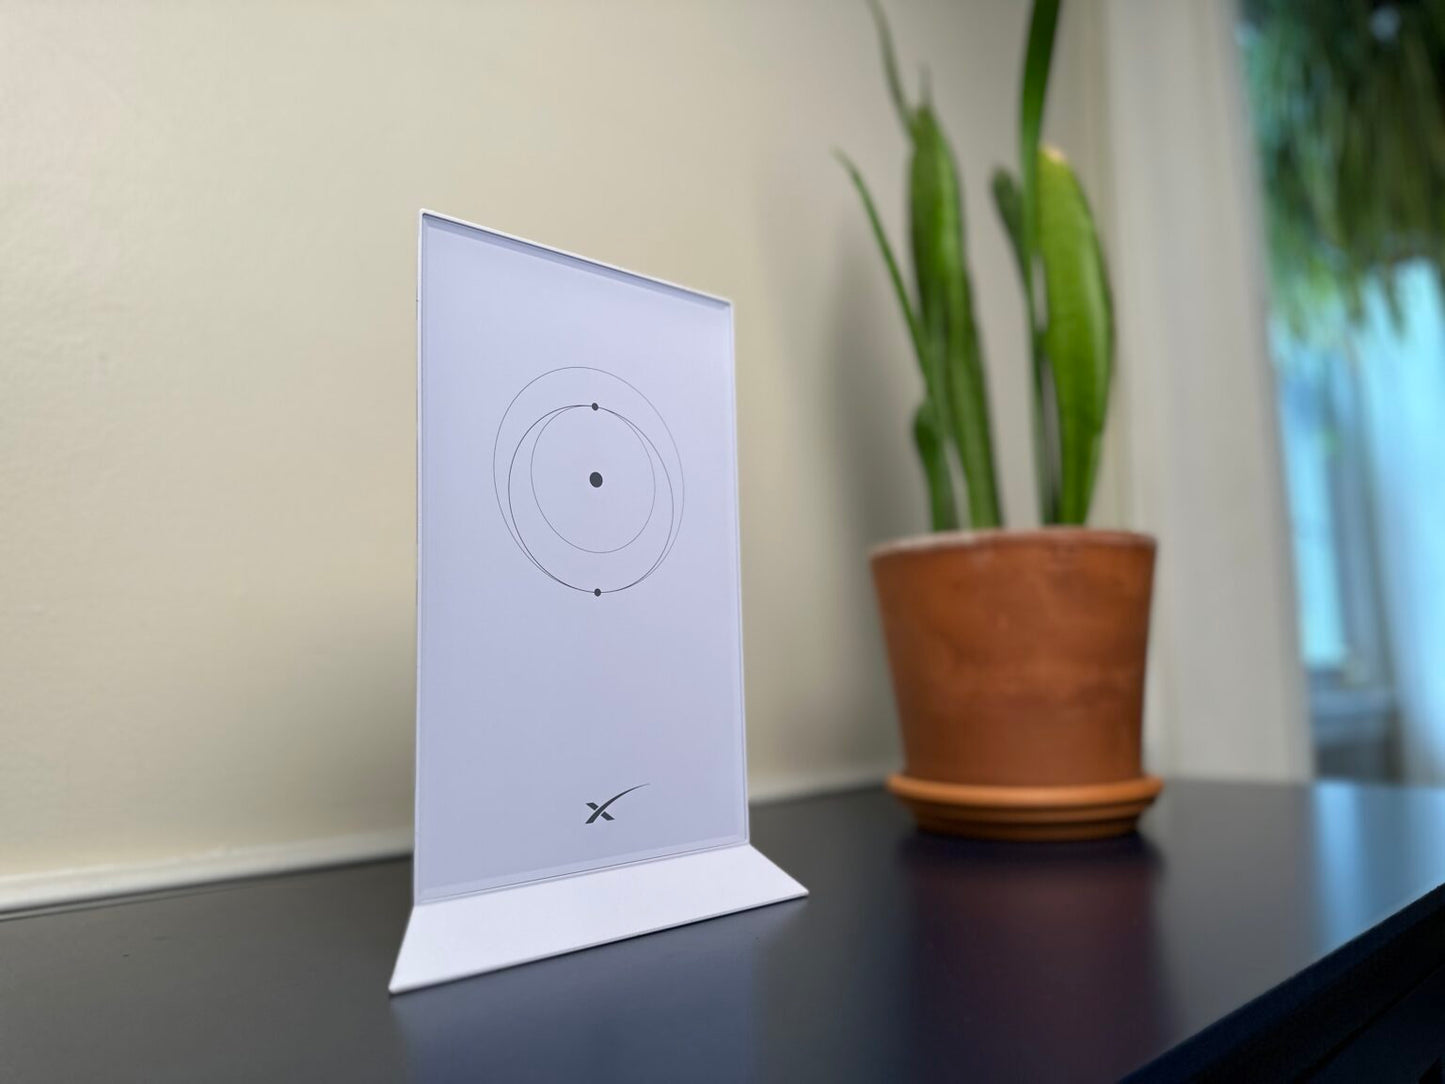 STARLINK MESH WIFI ROUTER